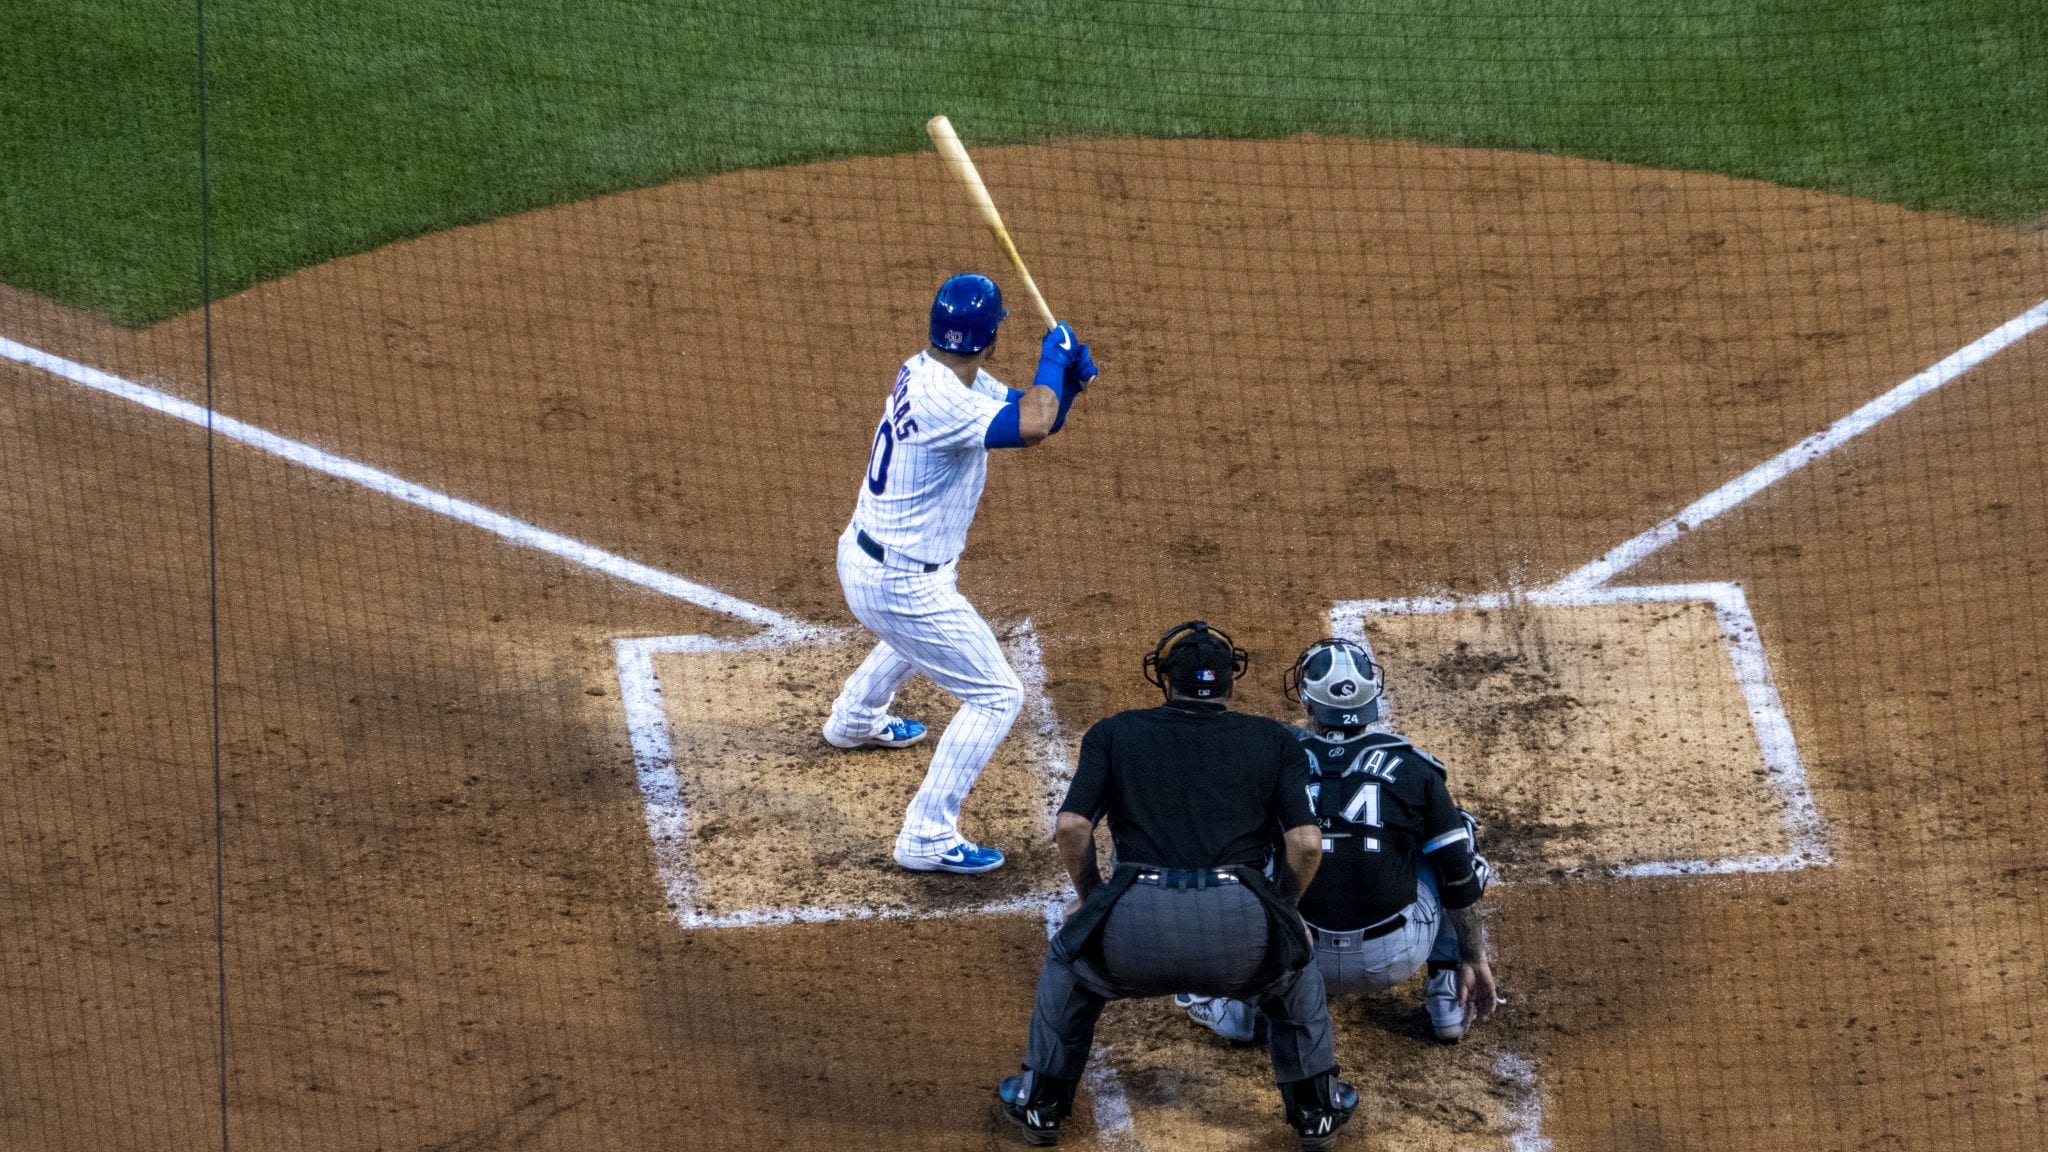 Contreras At The Plate